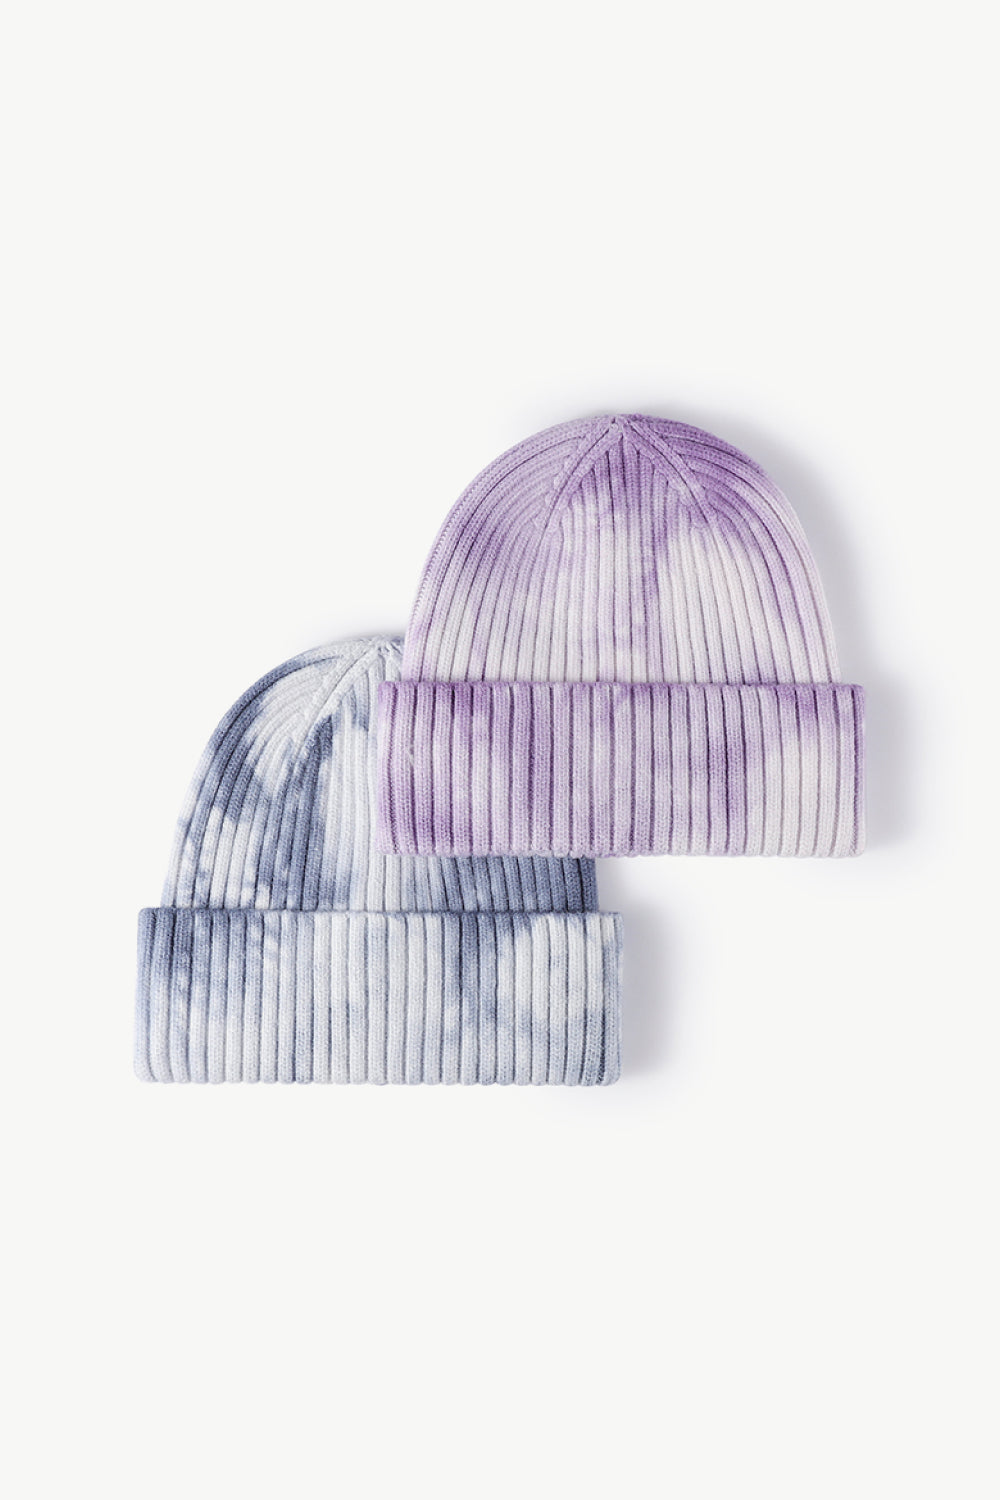 Blue and Purple Unisex Tie Dye Beanie Hat, Athletic Accessories and Fitness Accessory